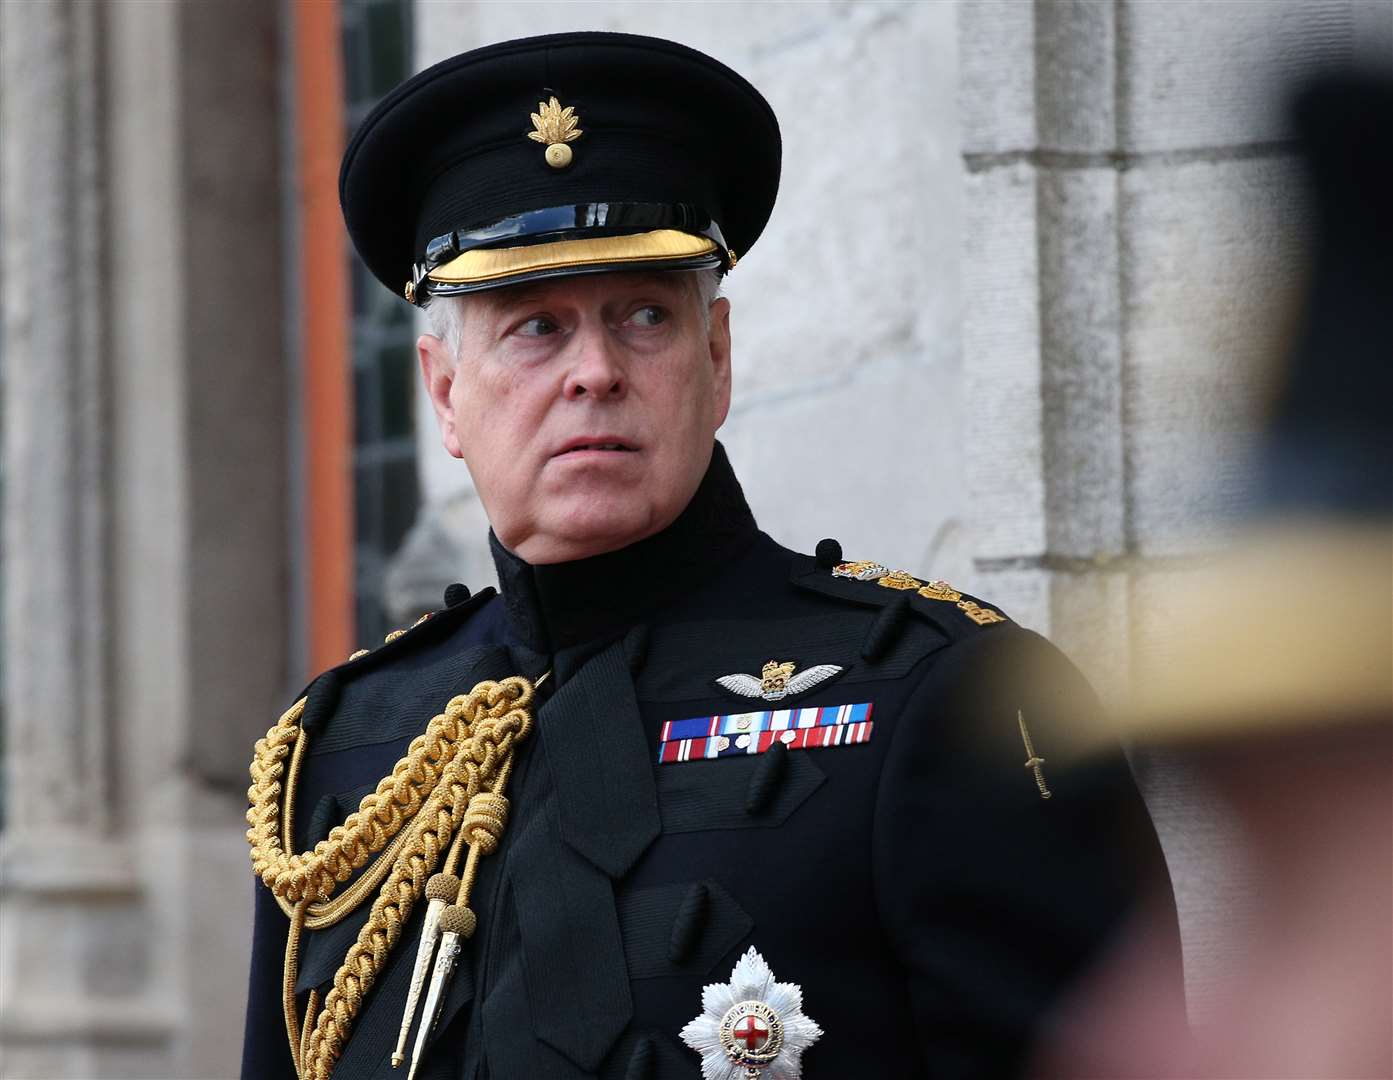 The Duke of York stepped down from royal duties in November (Jonathan Brady/PA)